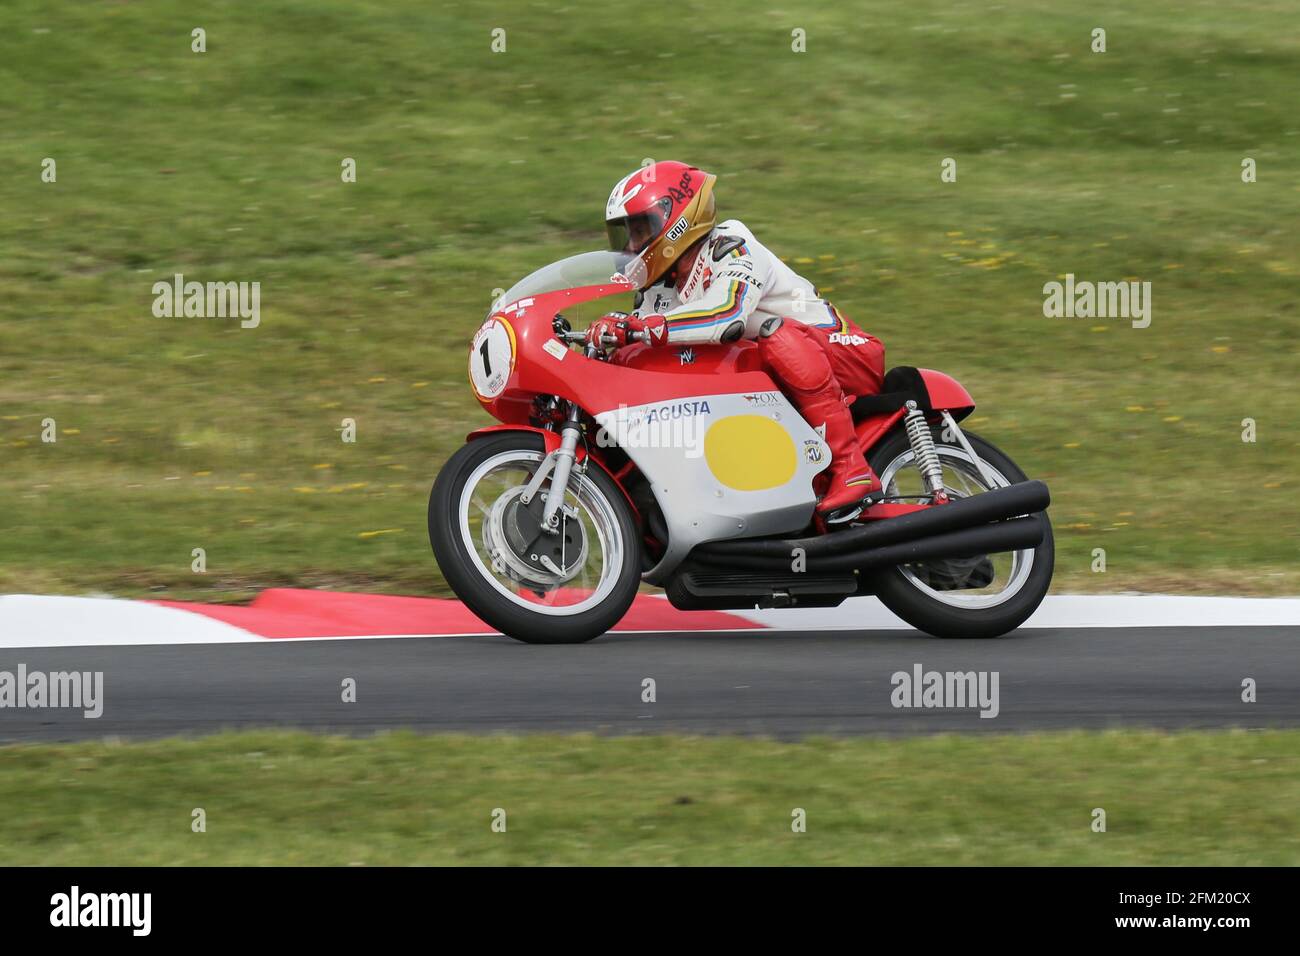 15 Times World Champion Giacomo Agostini aboard the 500cc 3 Cylinder MV Agusta at the Cadwell International Classic in July 2015 Stock Photo